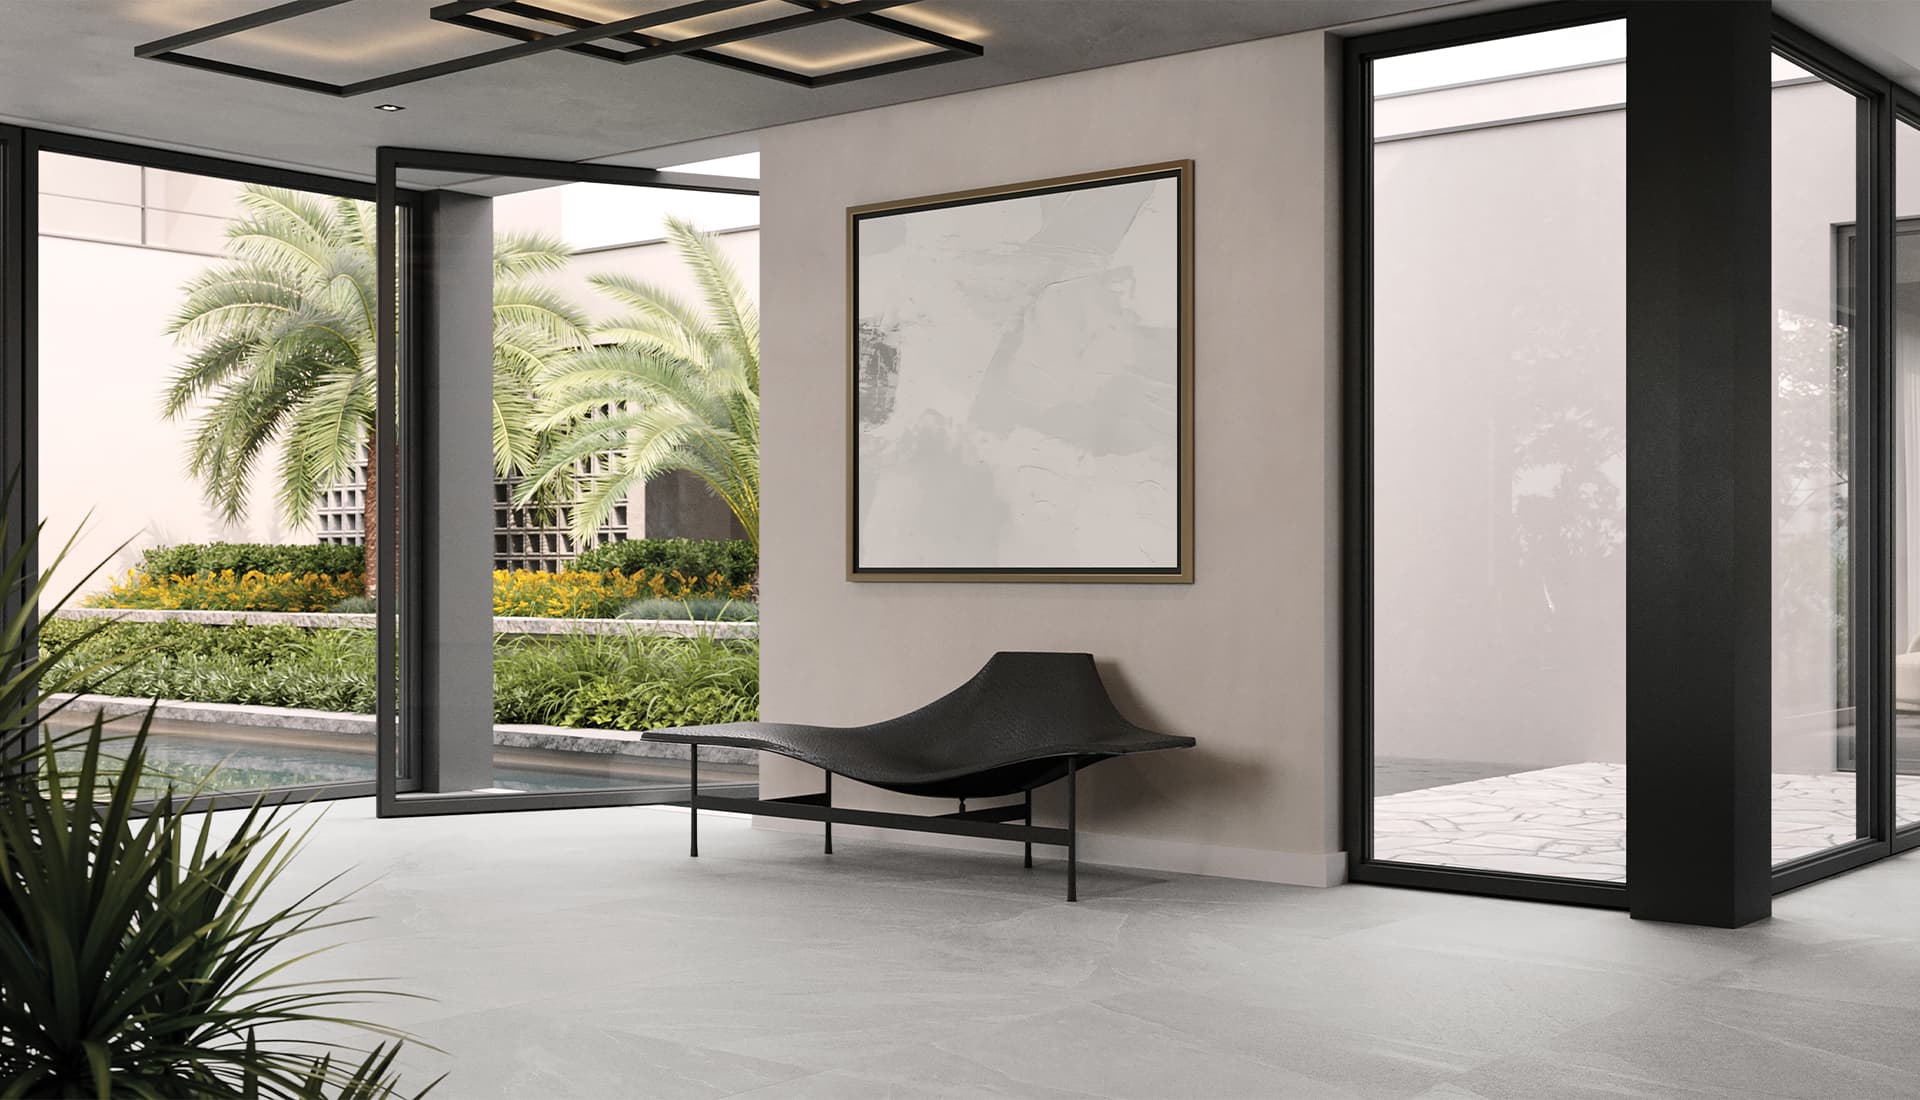 24 x 24 in / 59.7 x 59.7 cm Nord Lithium Matte Rectified Color Body Porcelain Tile